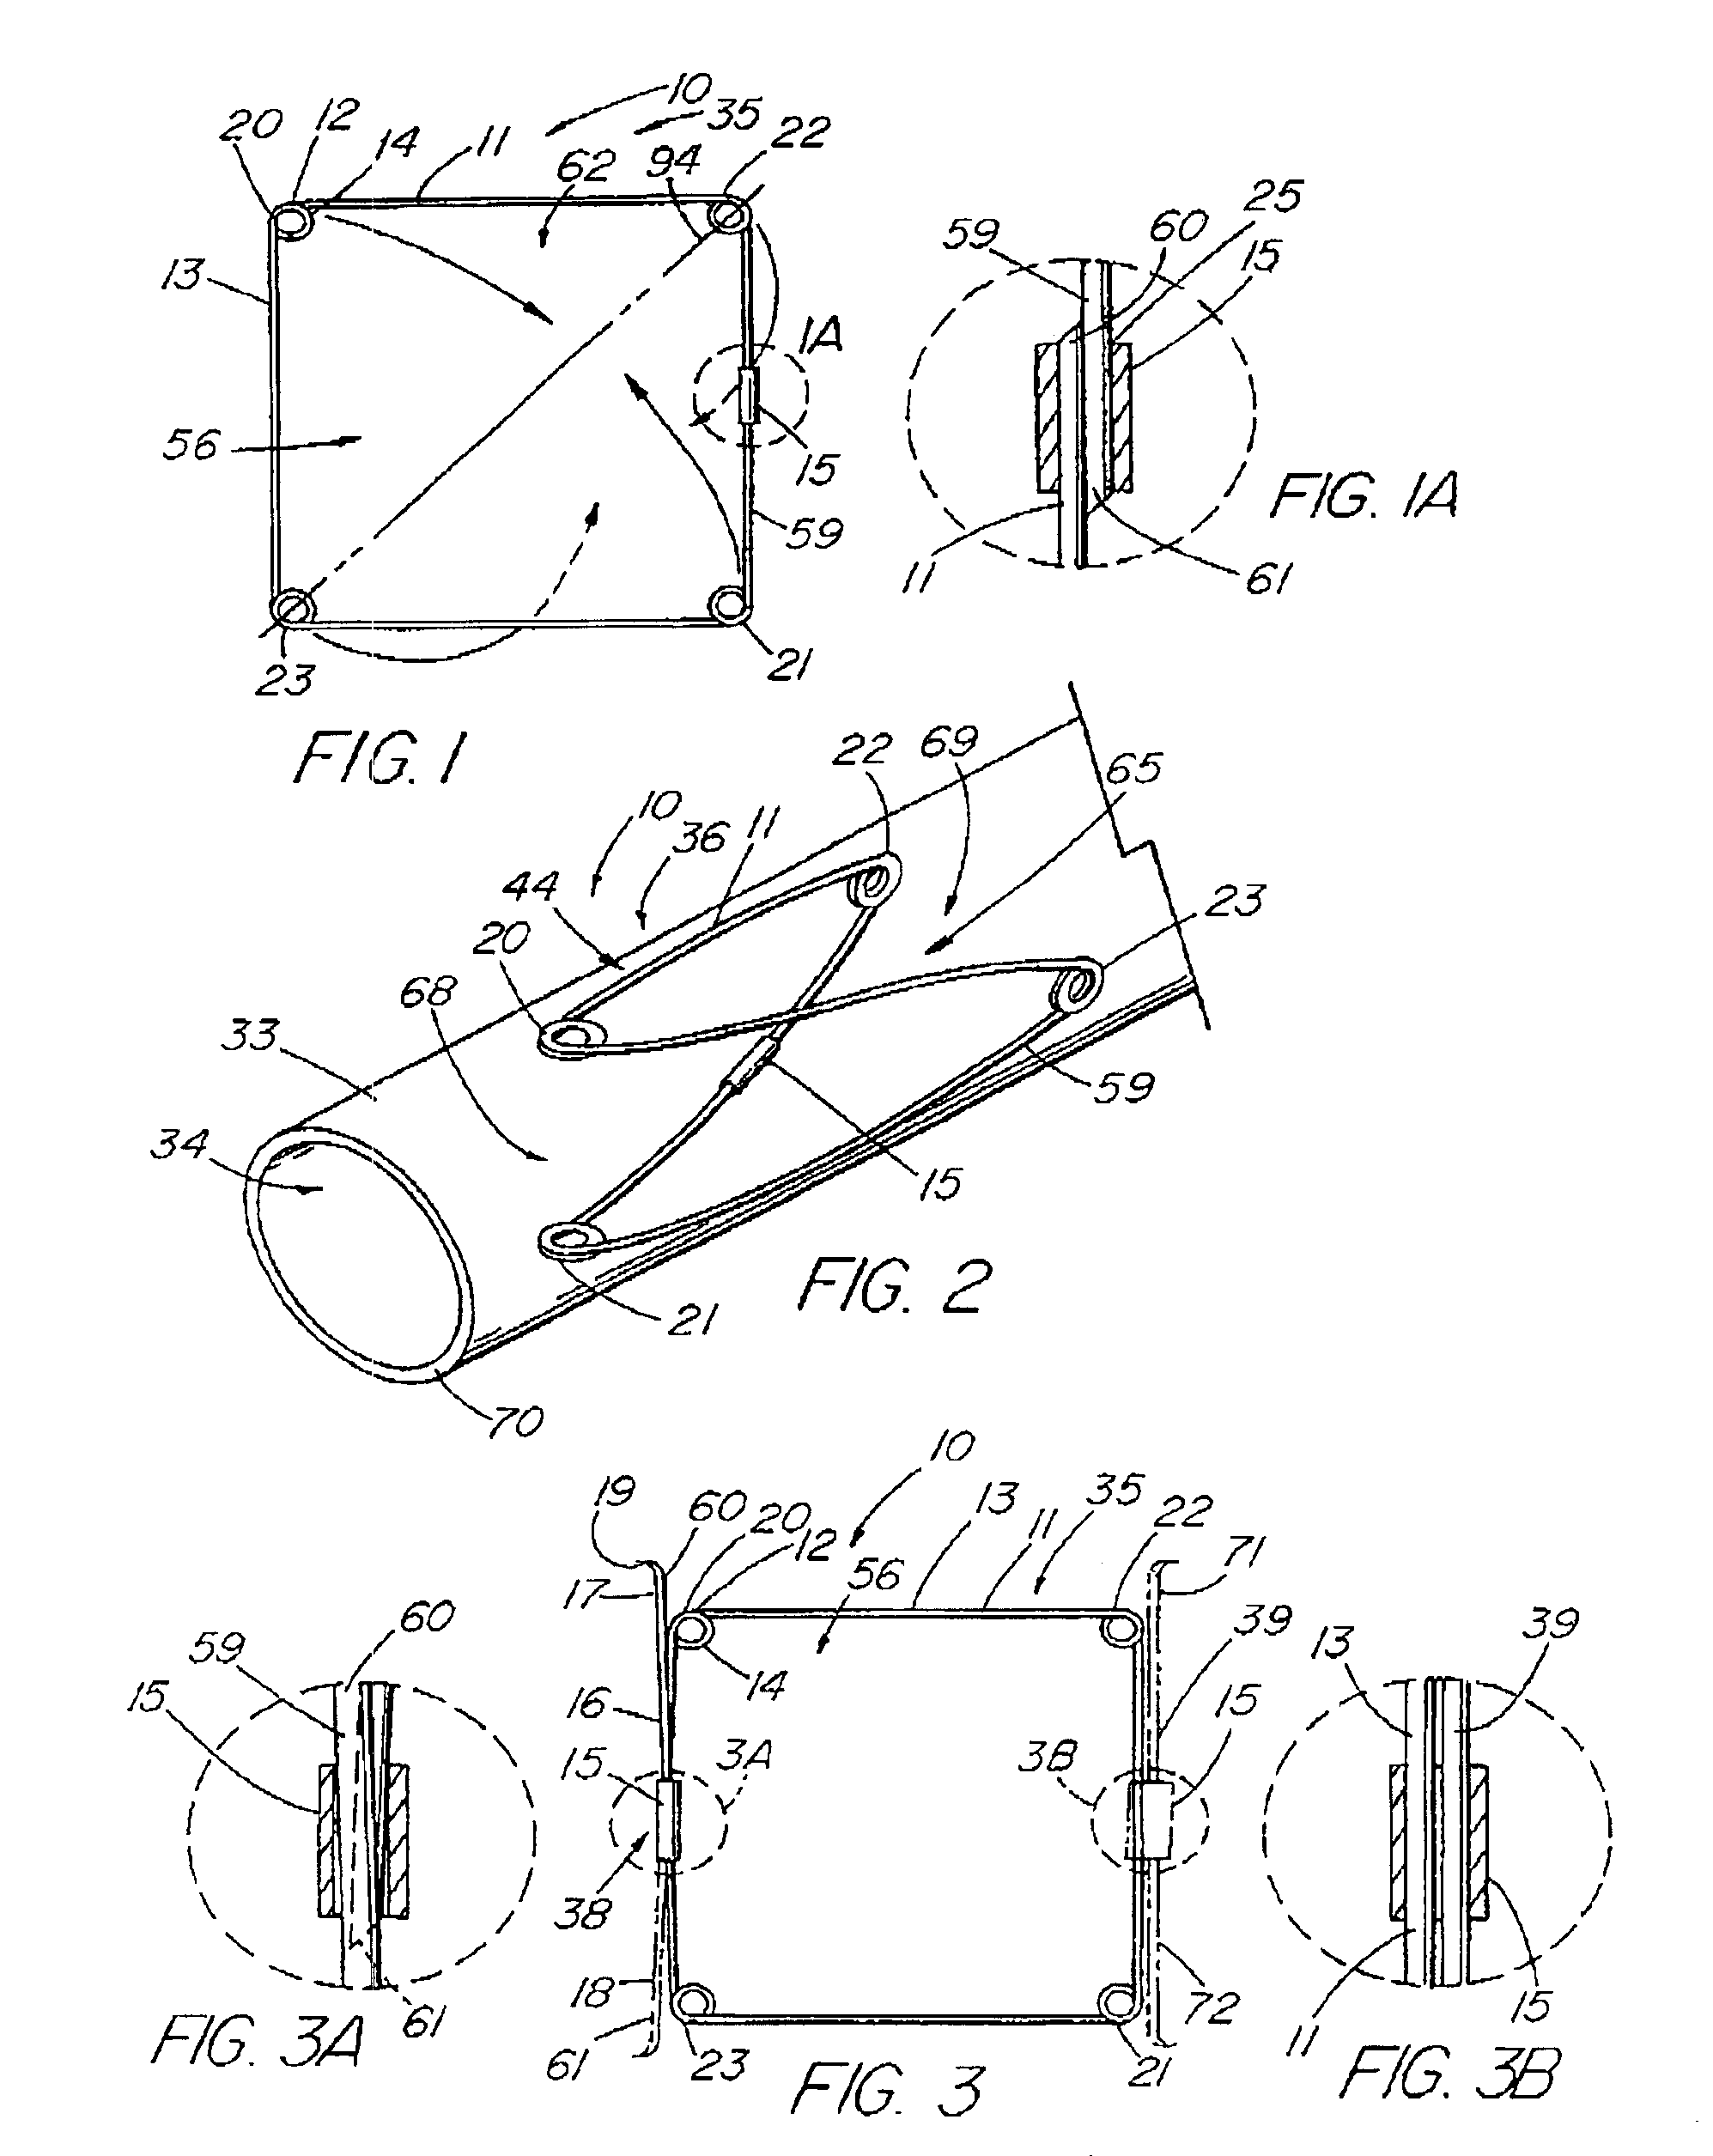 Multiple-sided intraluminal medical device